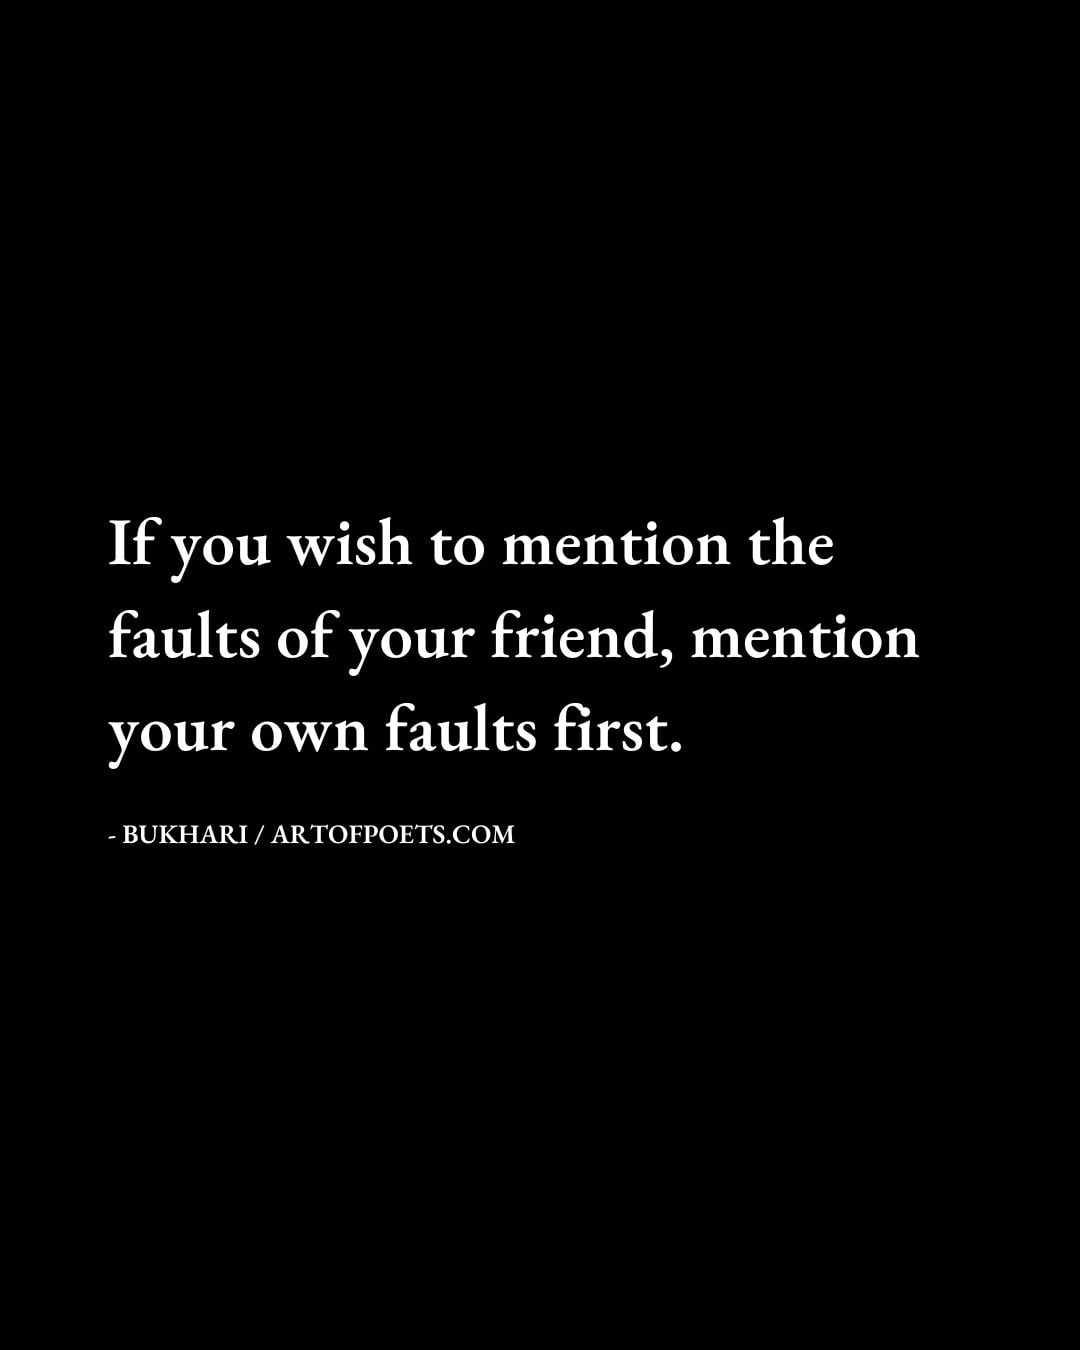 If you wish to mention the faults of your friend mention your own faults first. Bukhari